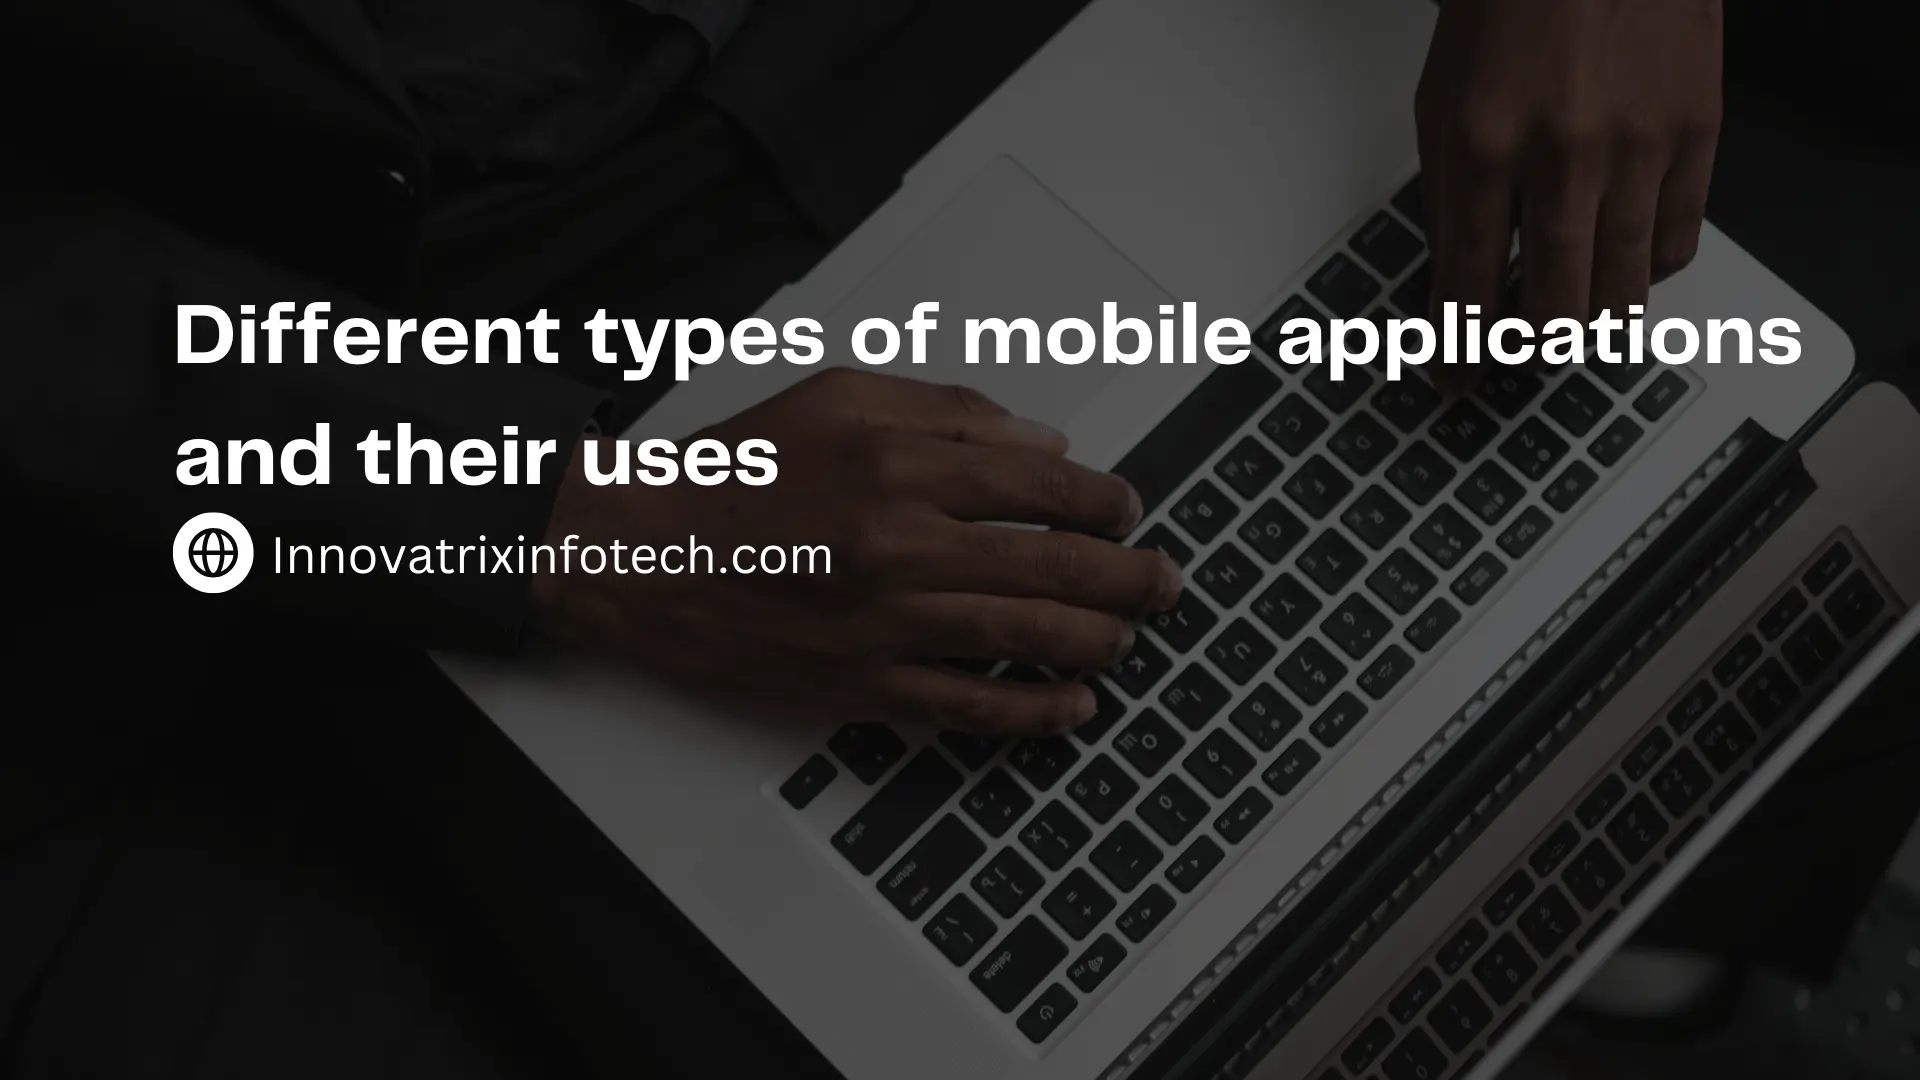 Different types of mobile applications and their uses